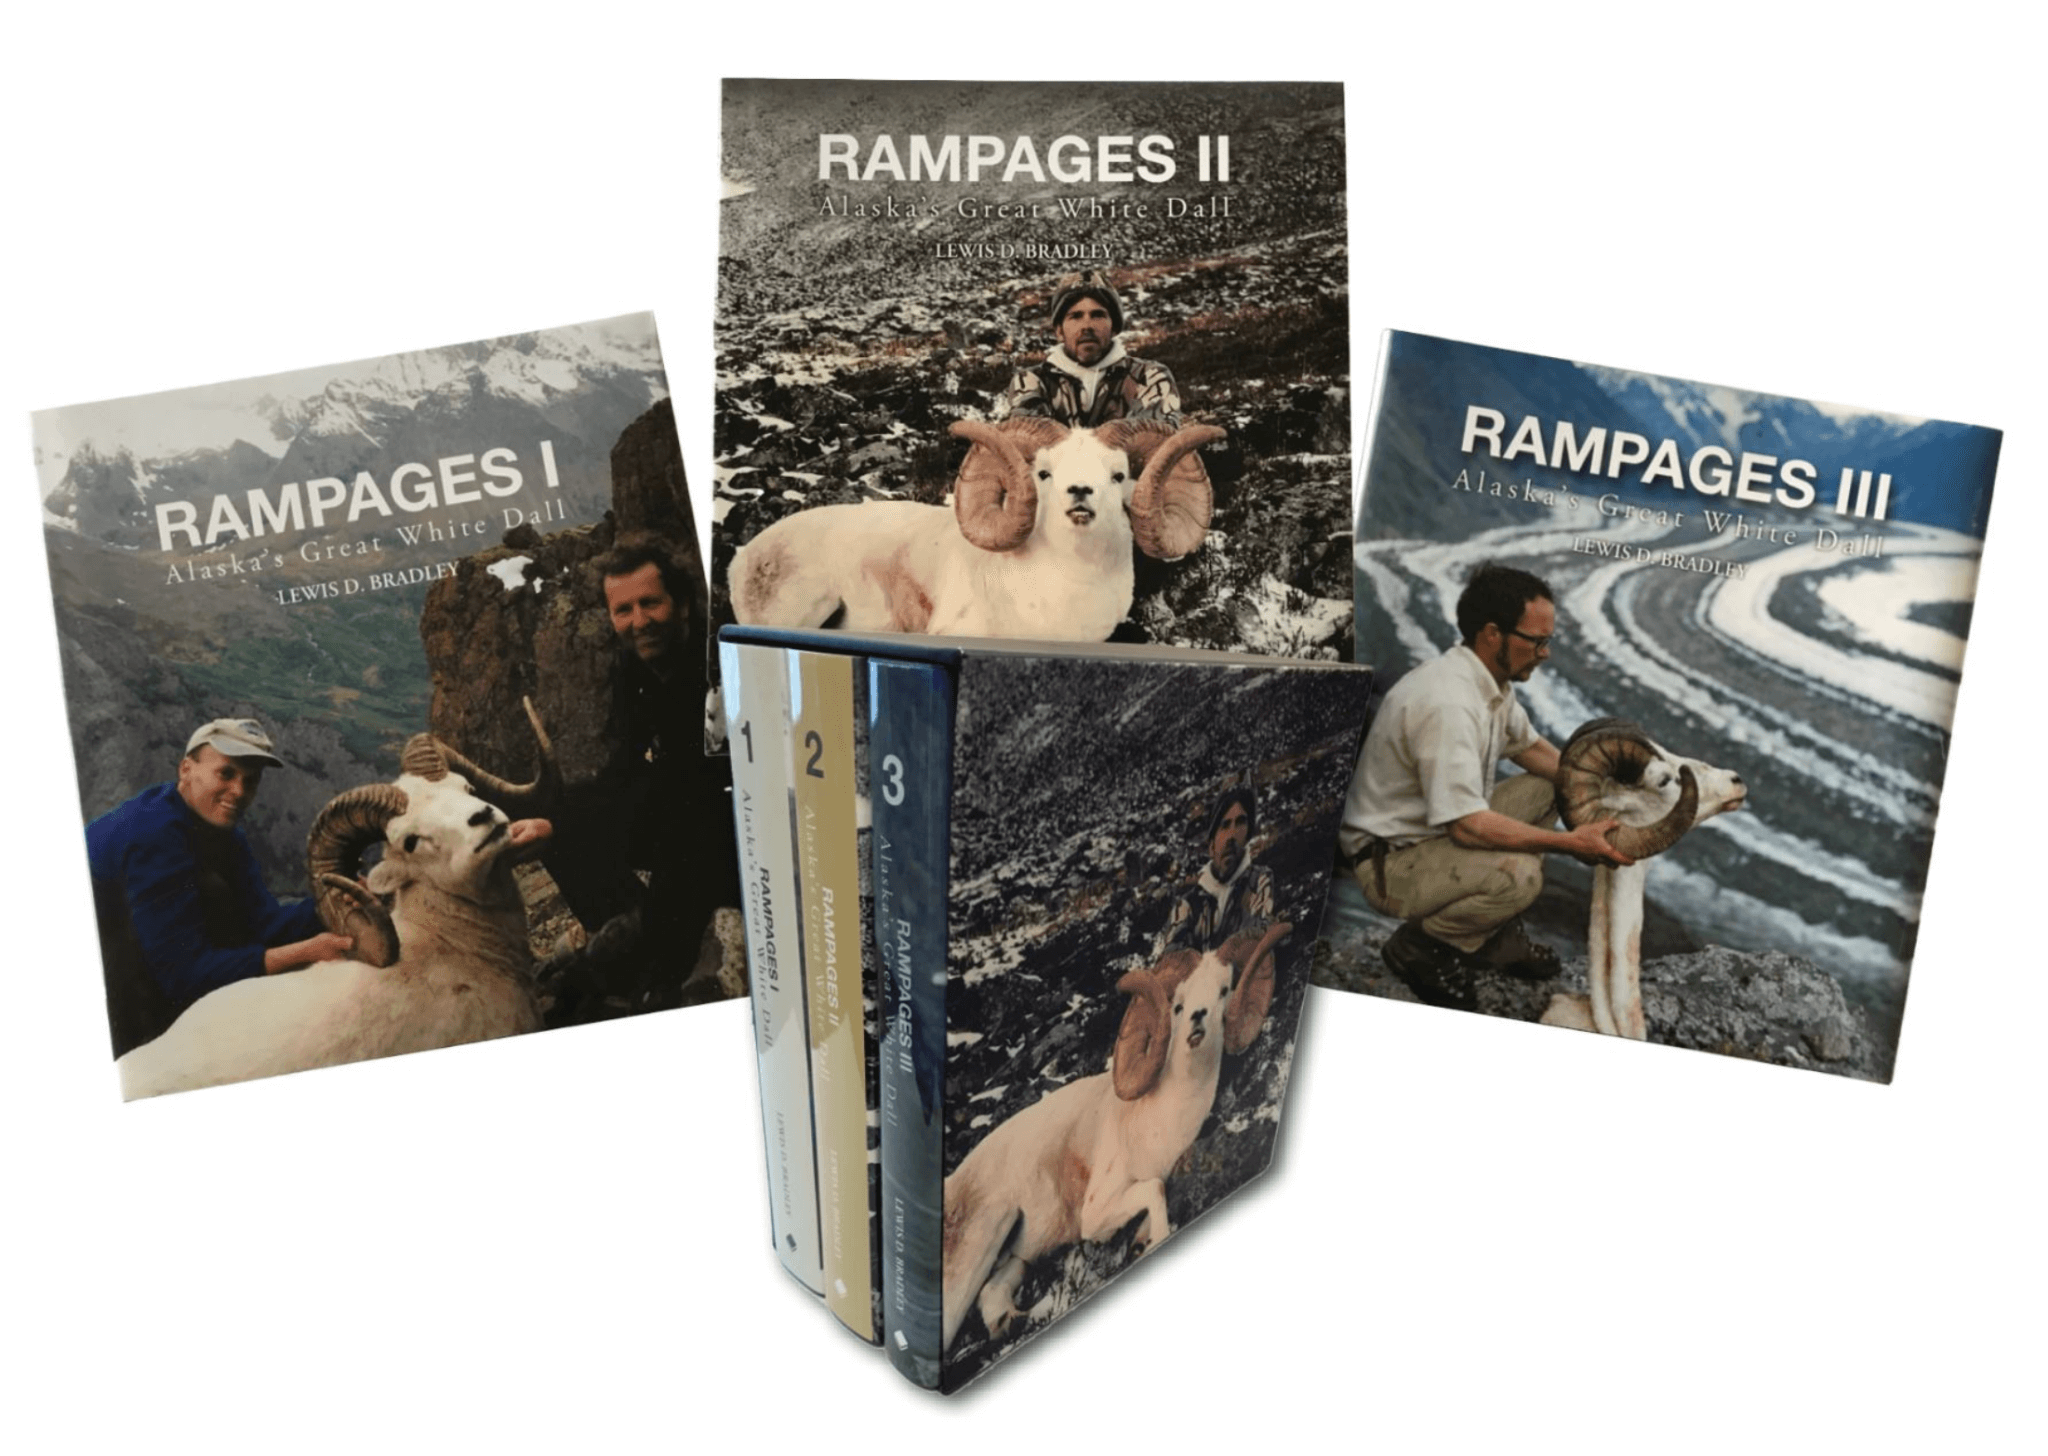 The book covers of Rampages Vol. I, II, & III by Lew Bradley